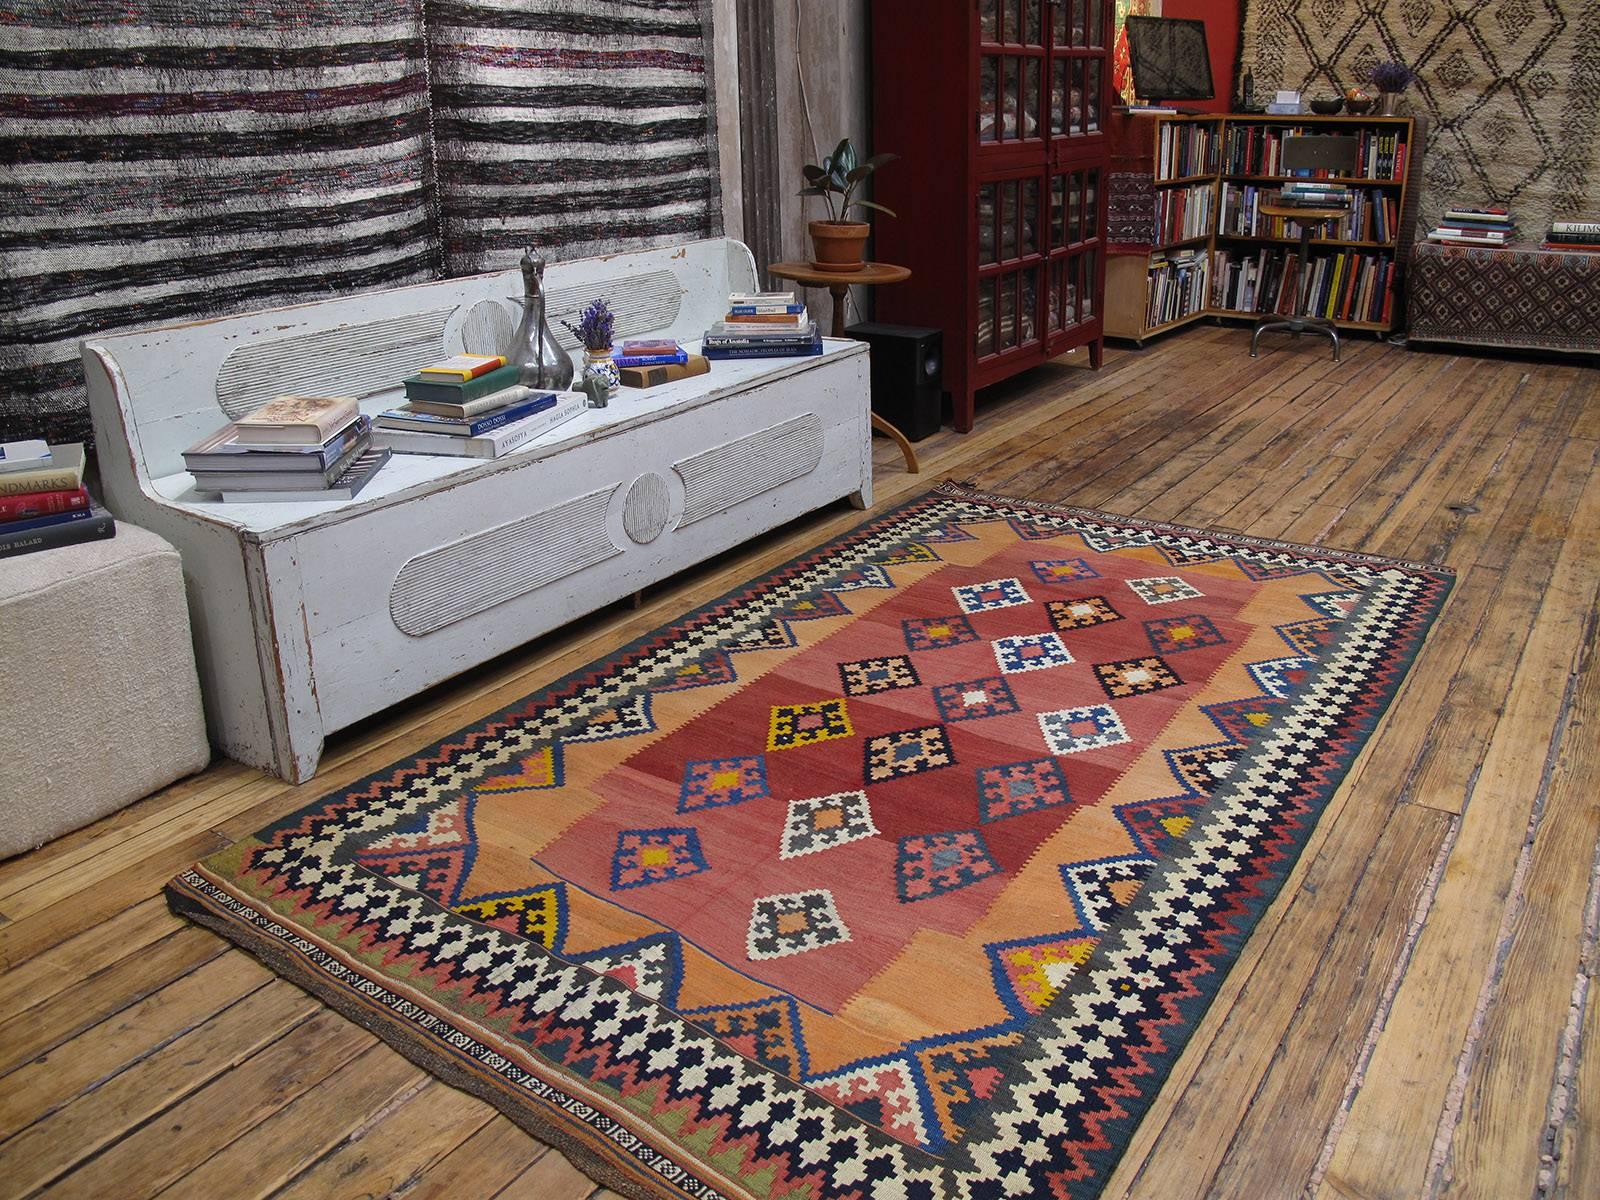 A lovely old tribal Kilim from Southwest Iran (Persia), by the Qashqai, a Turkic speaking confederation of tribes, who are very prolific weavers. Dating from the middle of 20th century, this Kilim still displays the fine work and design traditions